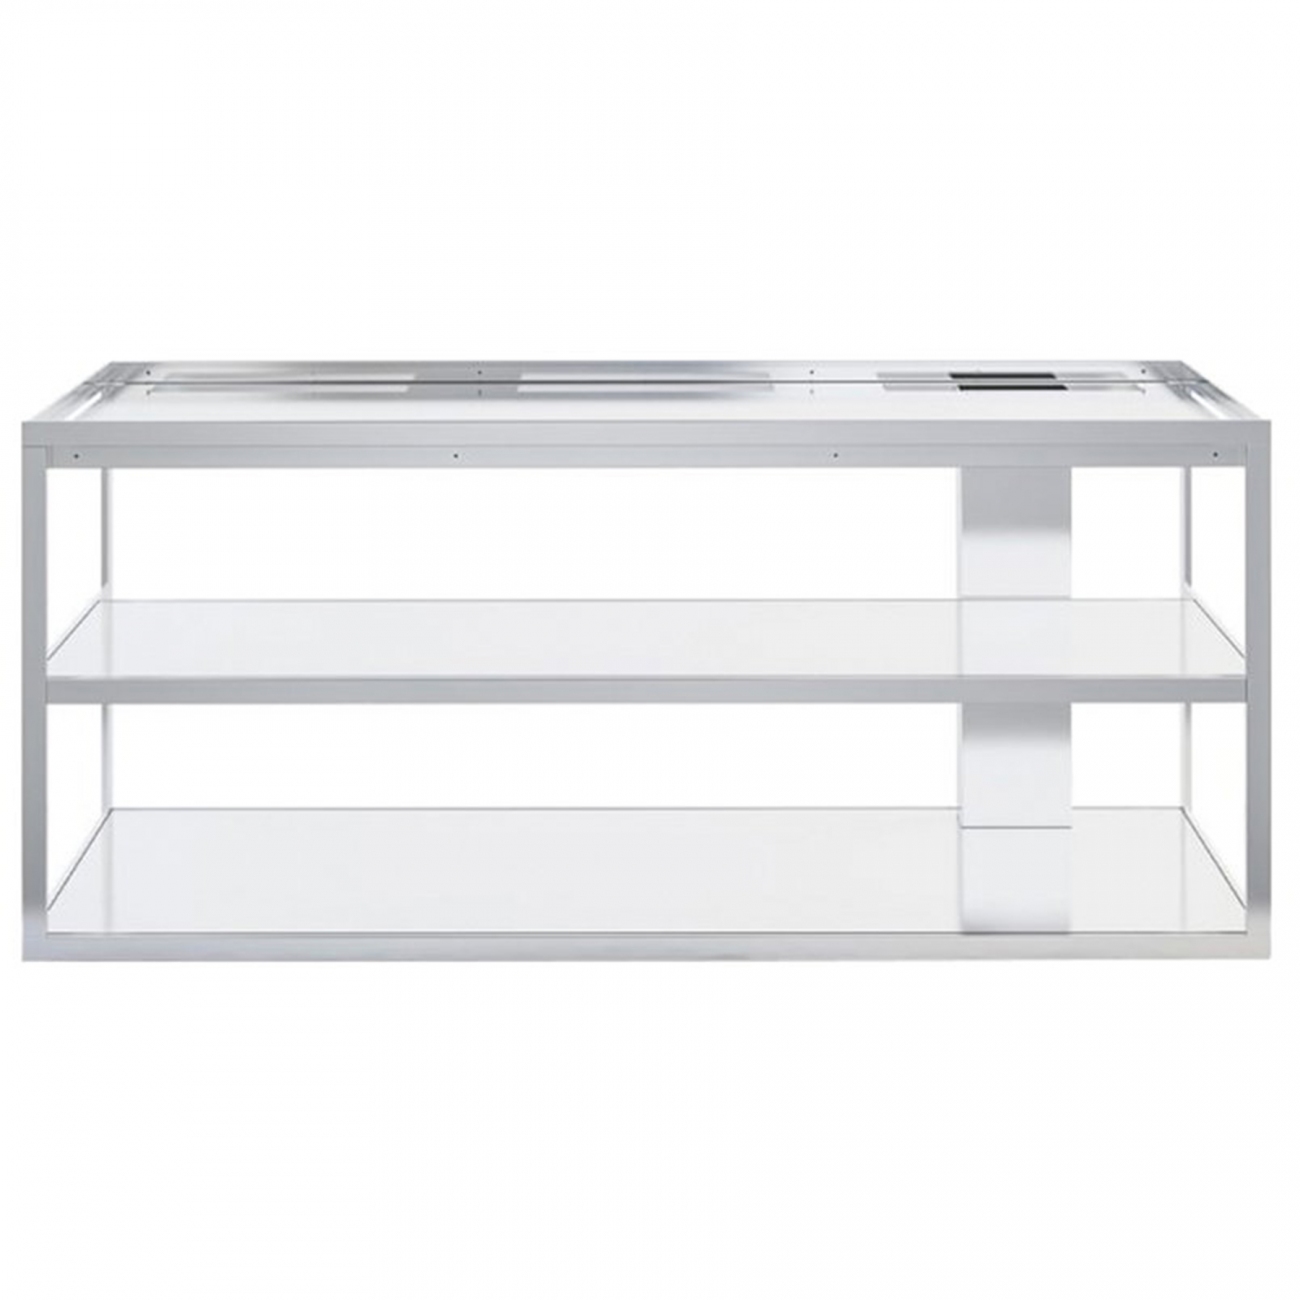 Röshults Open Kitchen Frame 150 Brushed Stainless Steel